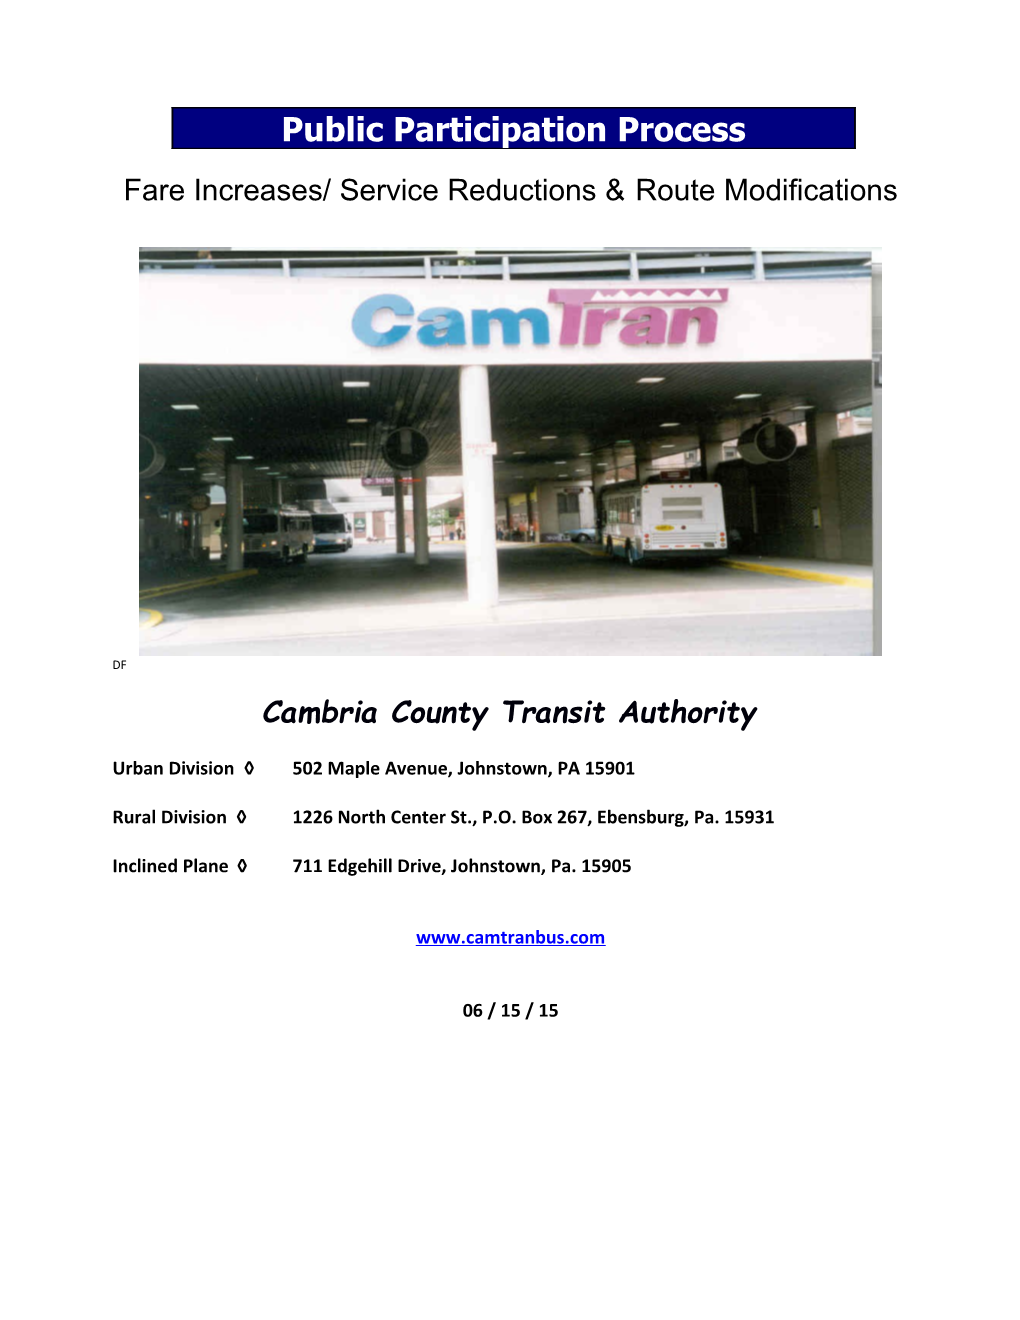 Cambria County Transit Authority